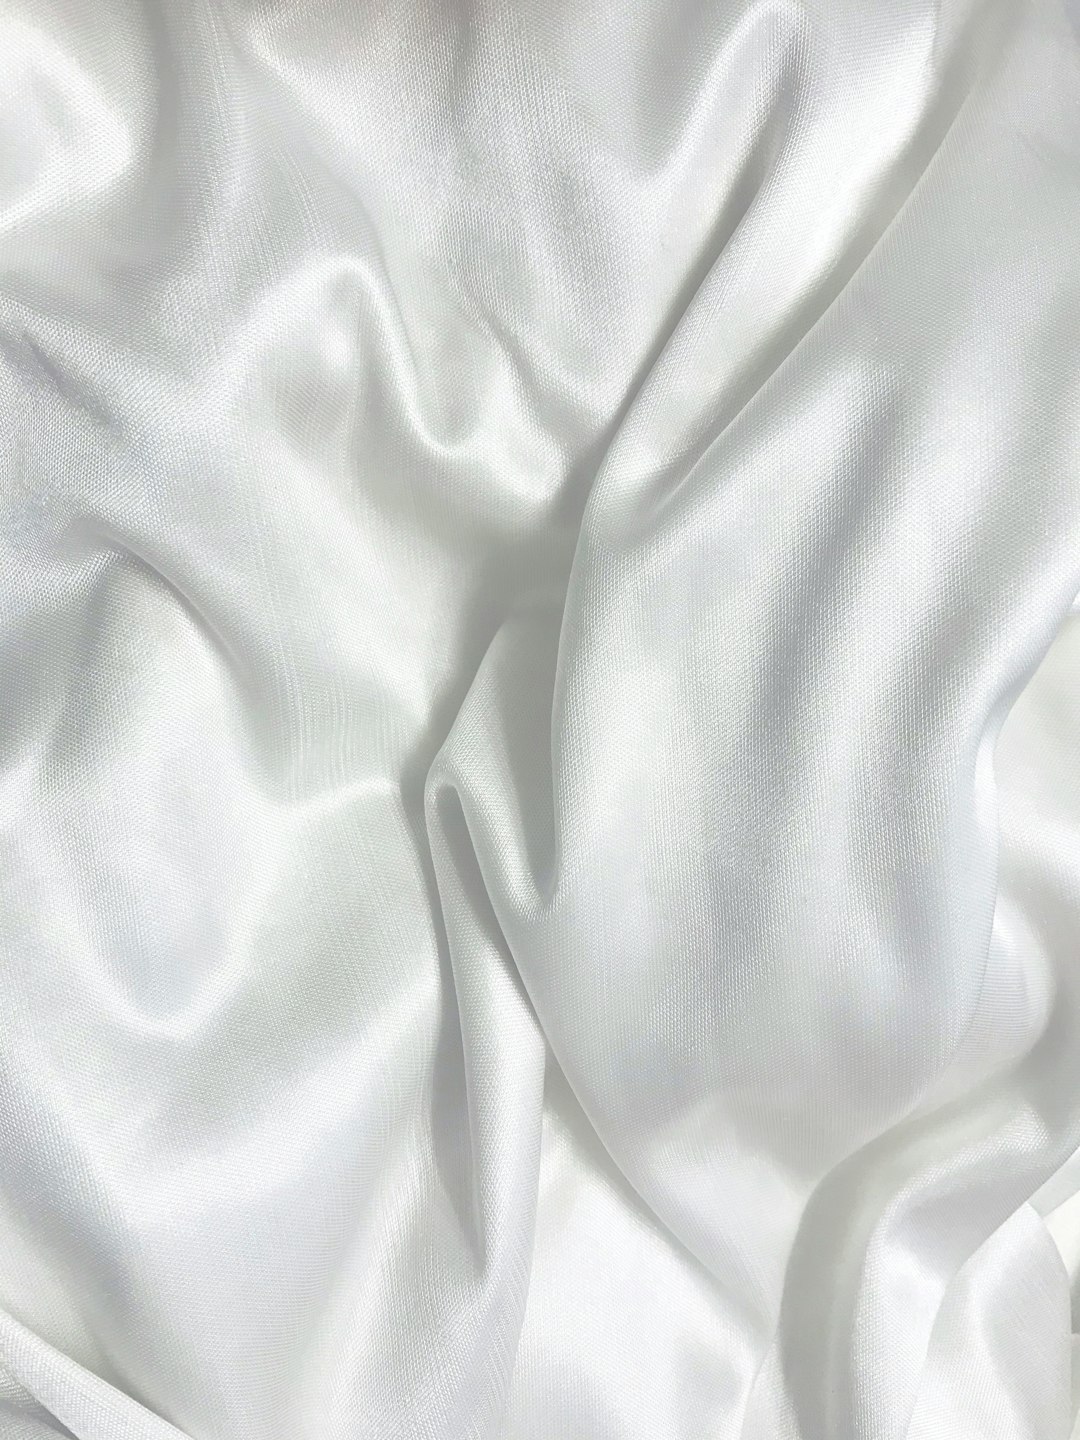  white textile on brown wooden table sheet